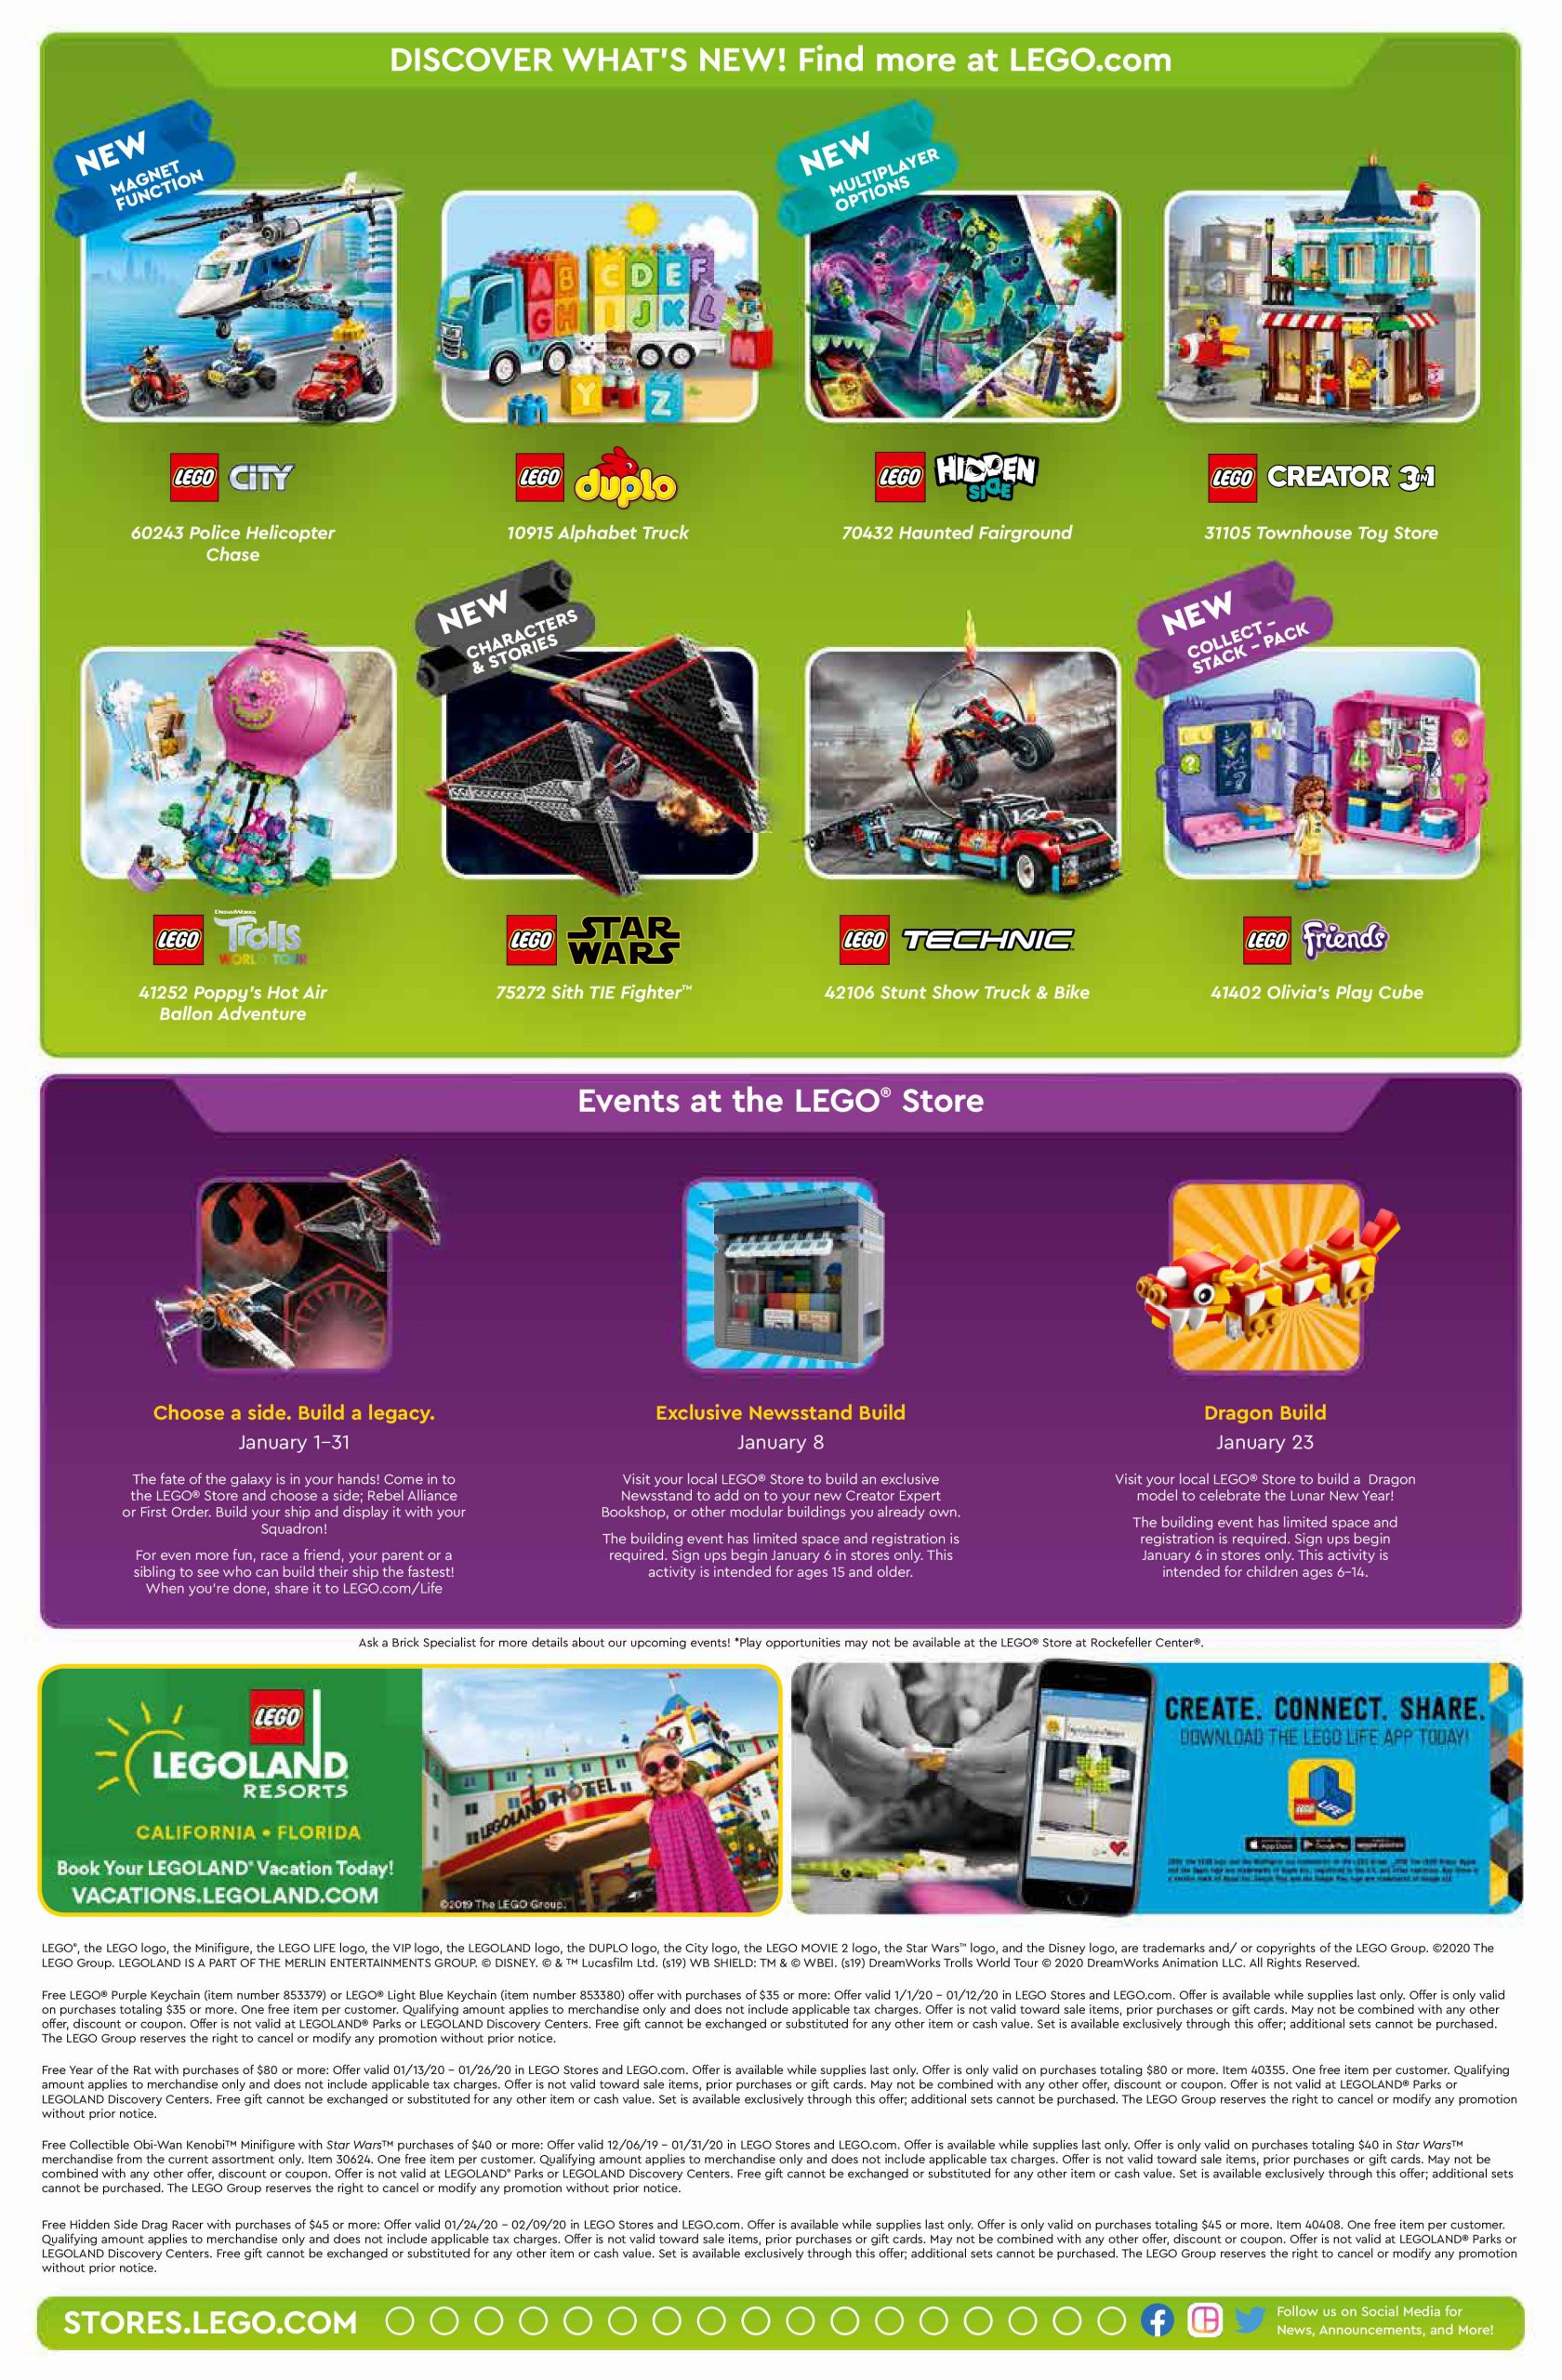 LEGO January 2020 Store Calendar Promotions & Events - The Brick Fan1680 x 2560